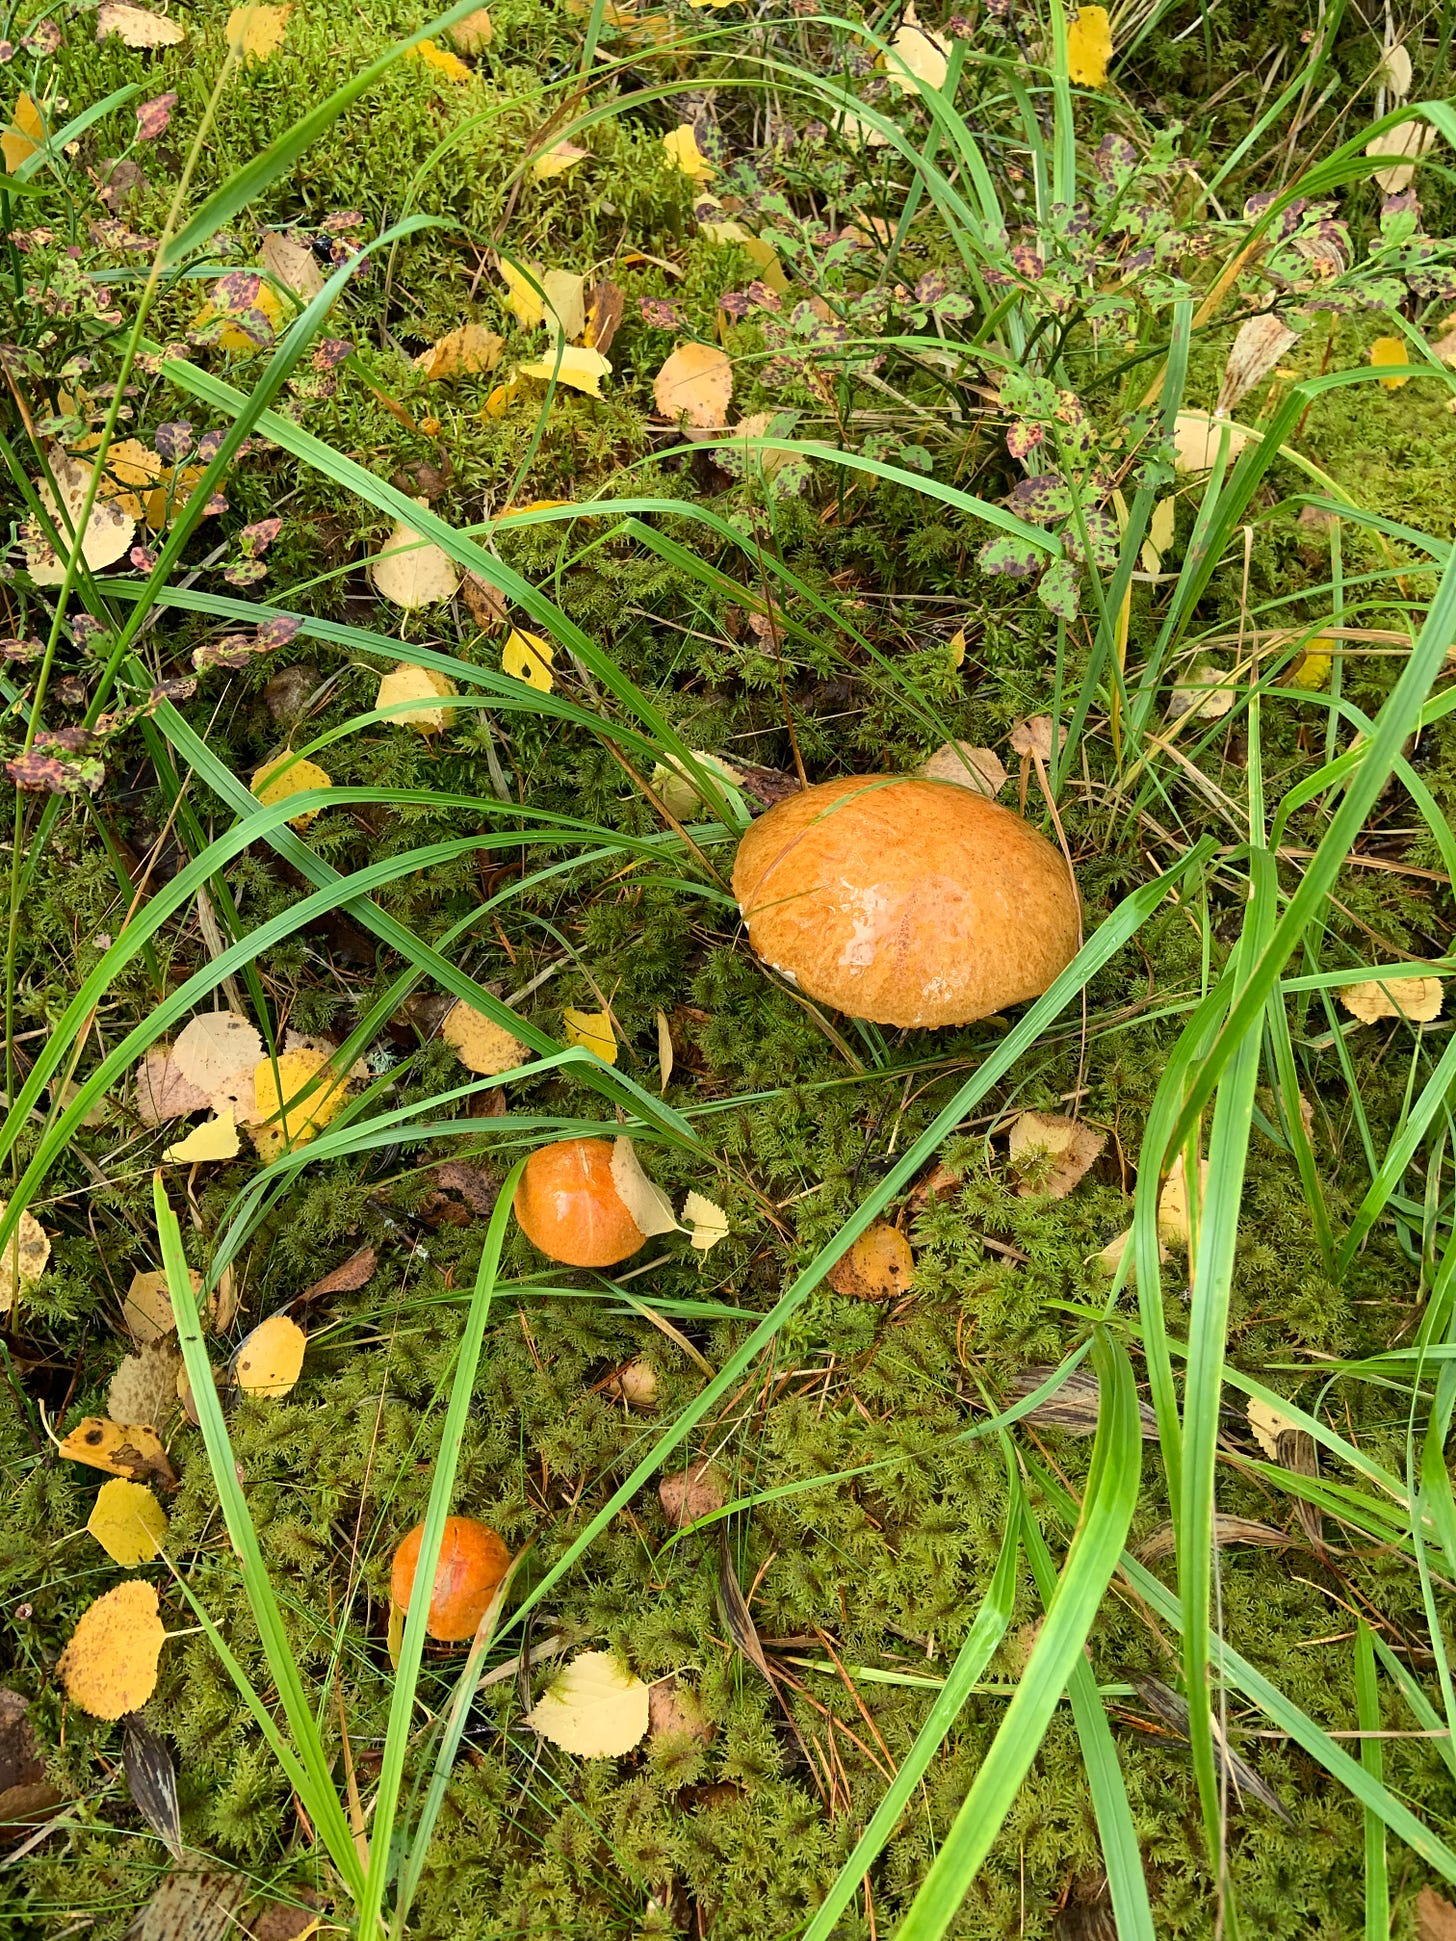 brownish poisonous mushrooms surrounded by green grass and plants 